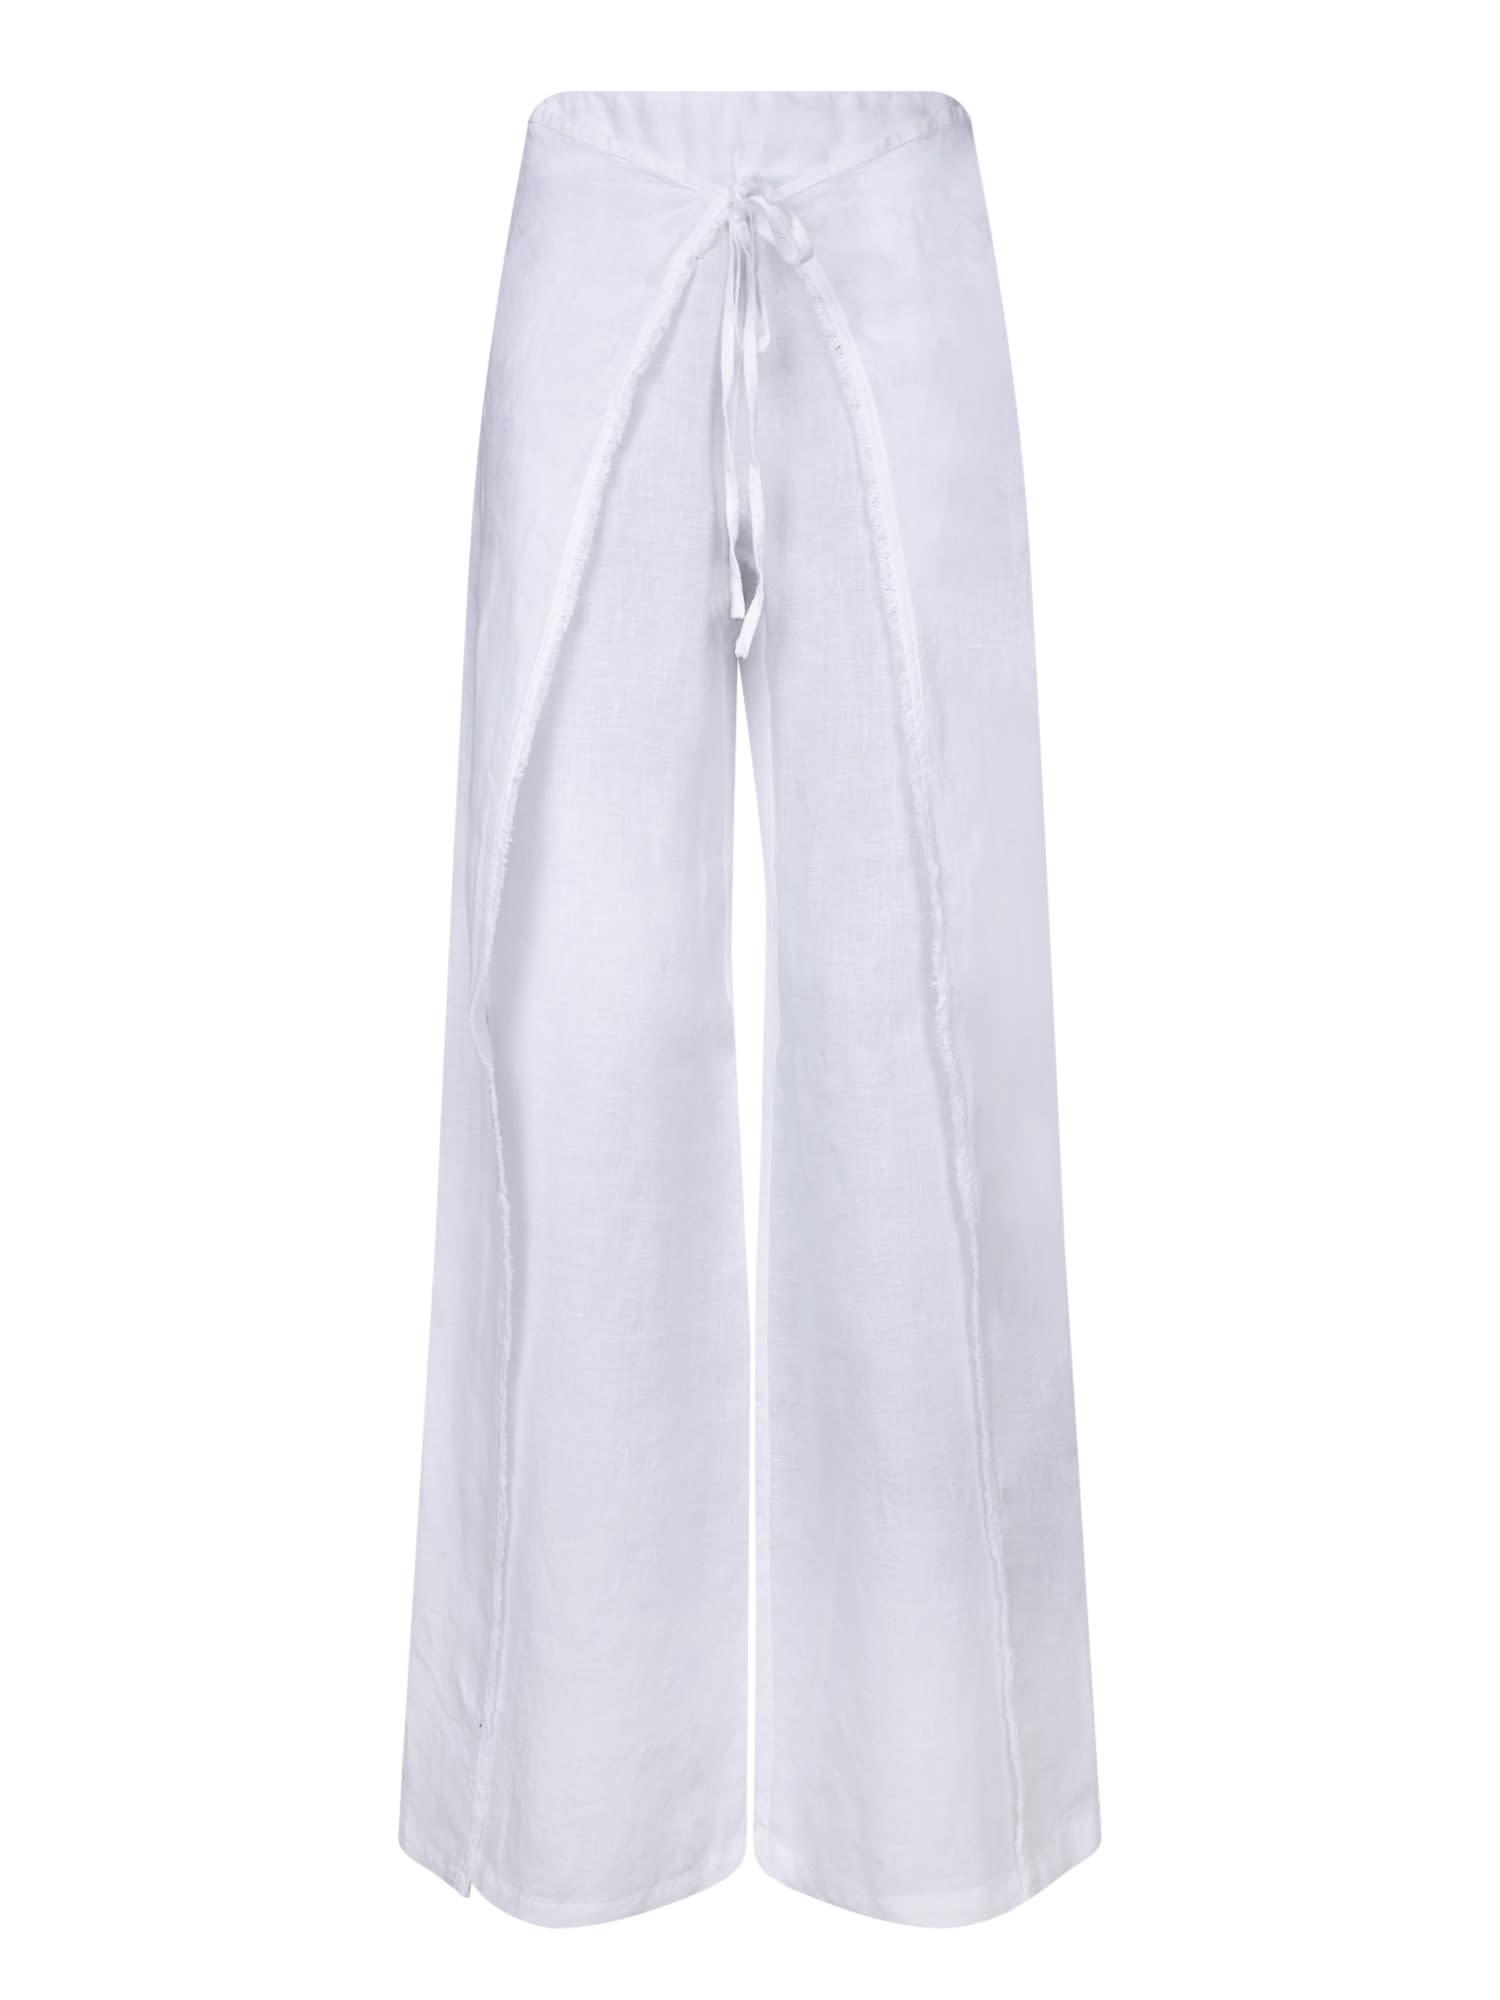 White Linen Pareo Trousers